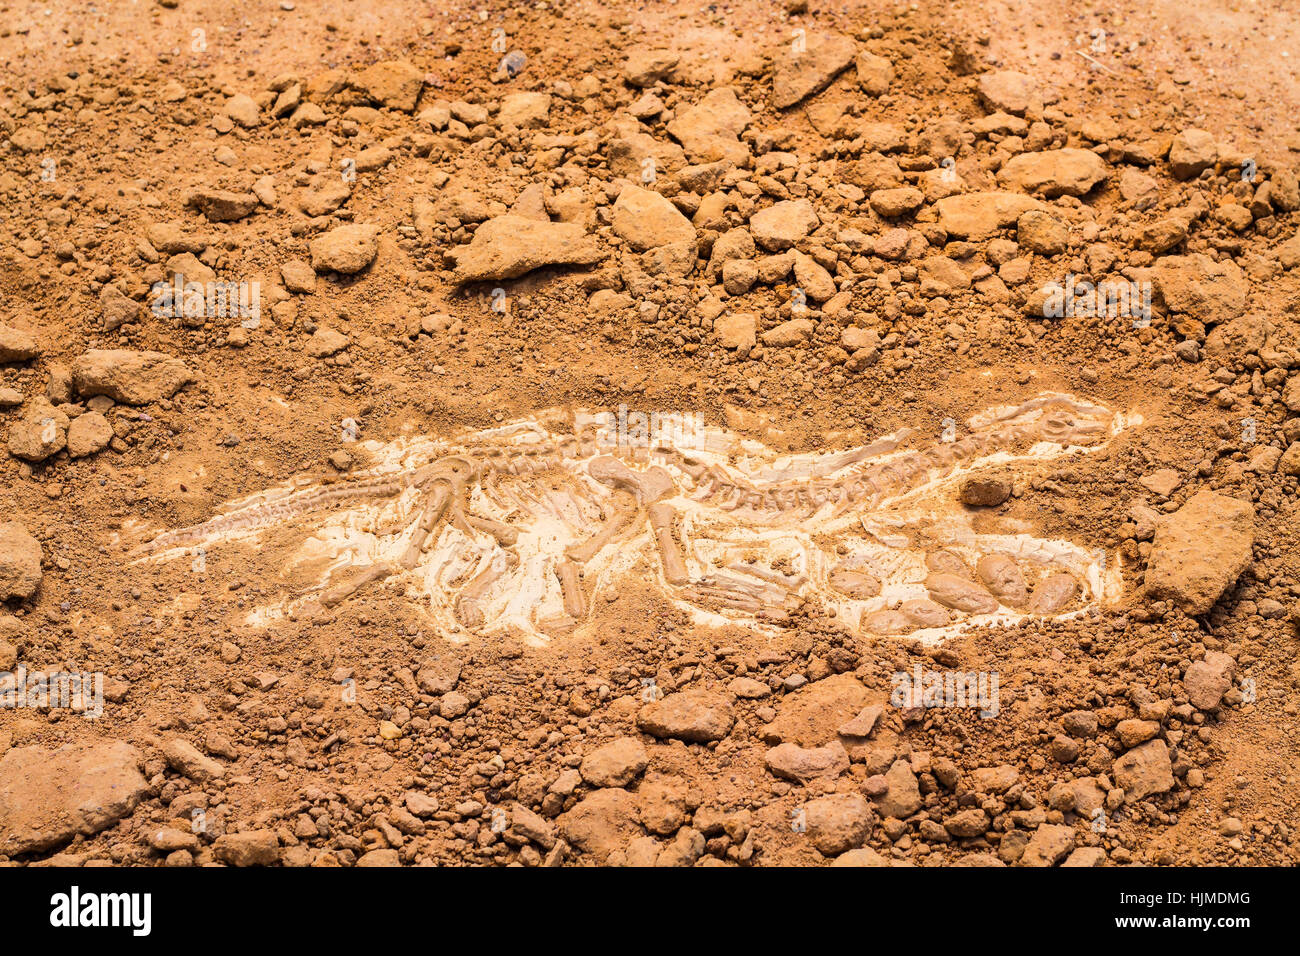 Skeleton and archaeological tools.Training for dig fossil.Simulated same as real digging. Stock Photo